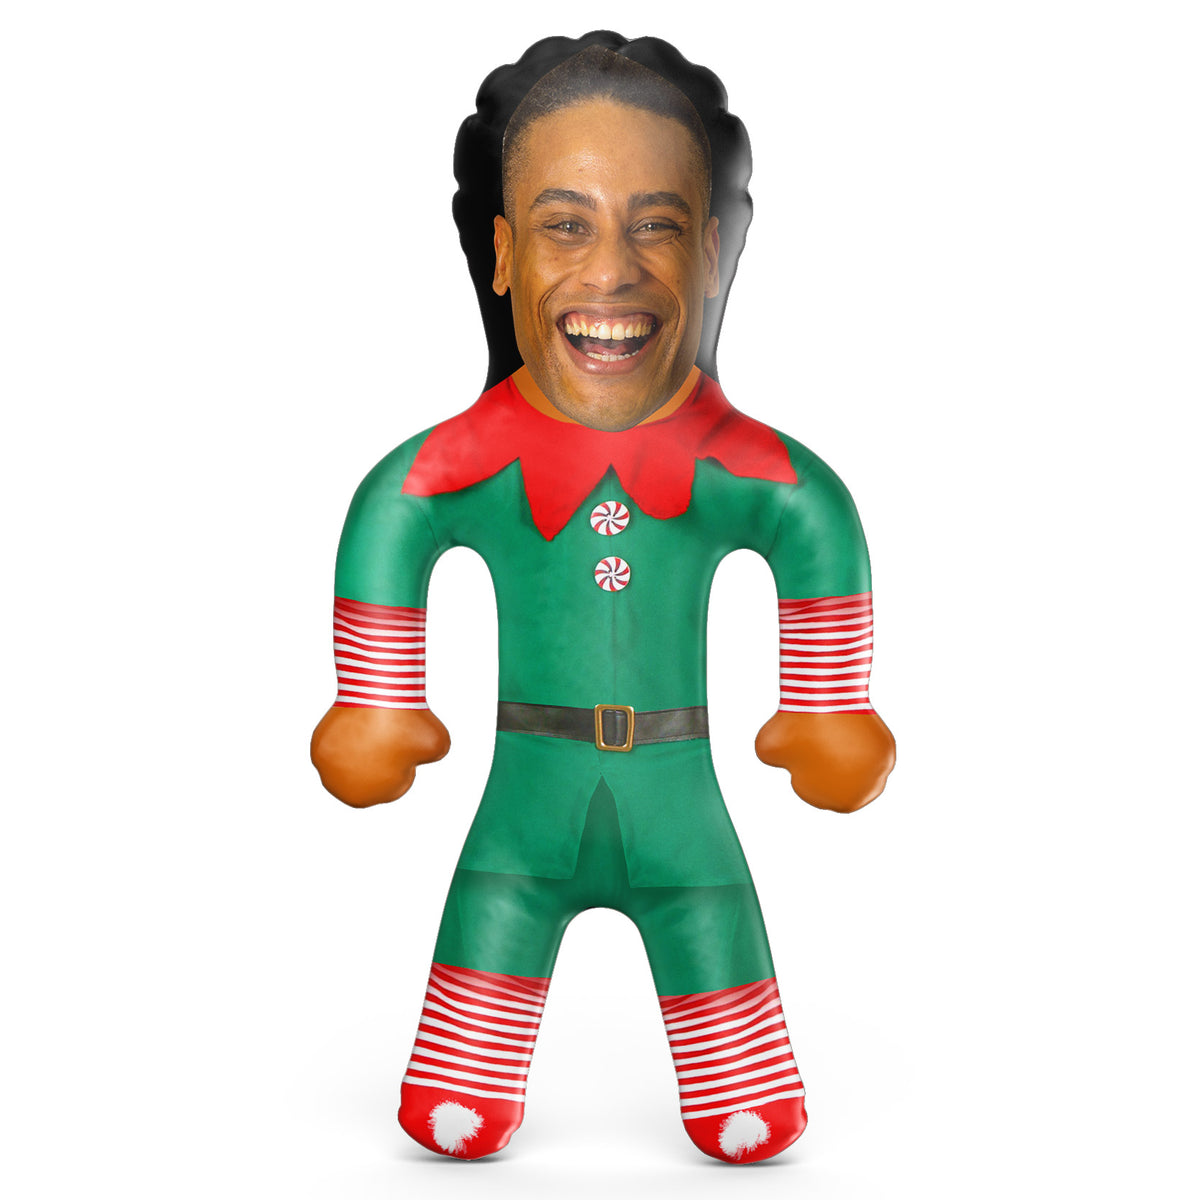 Elf Man Inflatable Doll - Elf Man Blow Up Doll